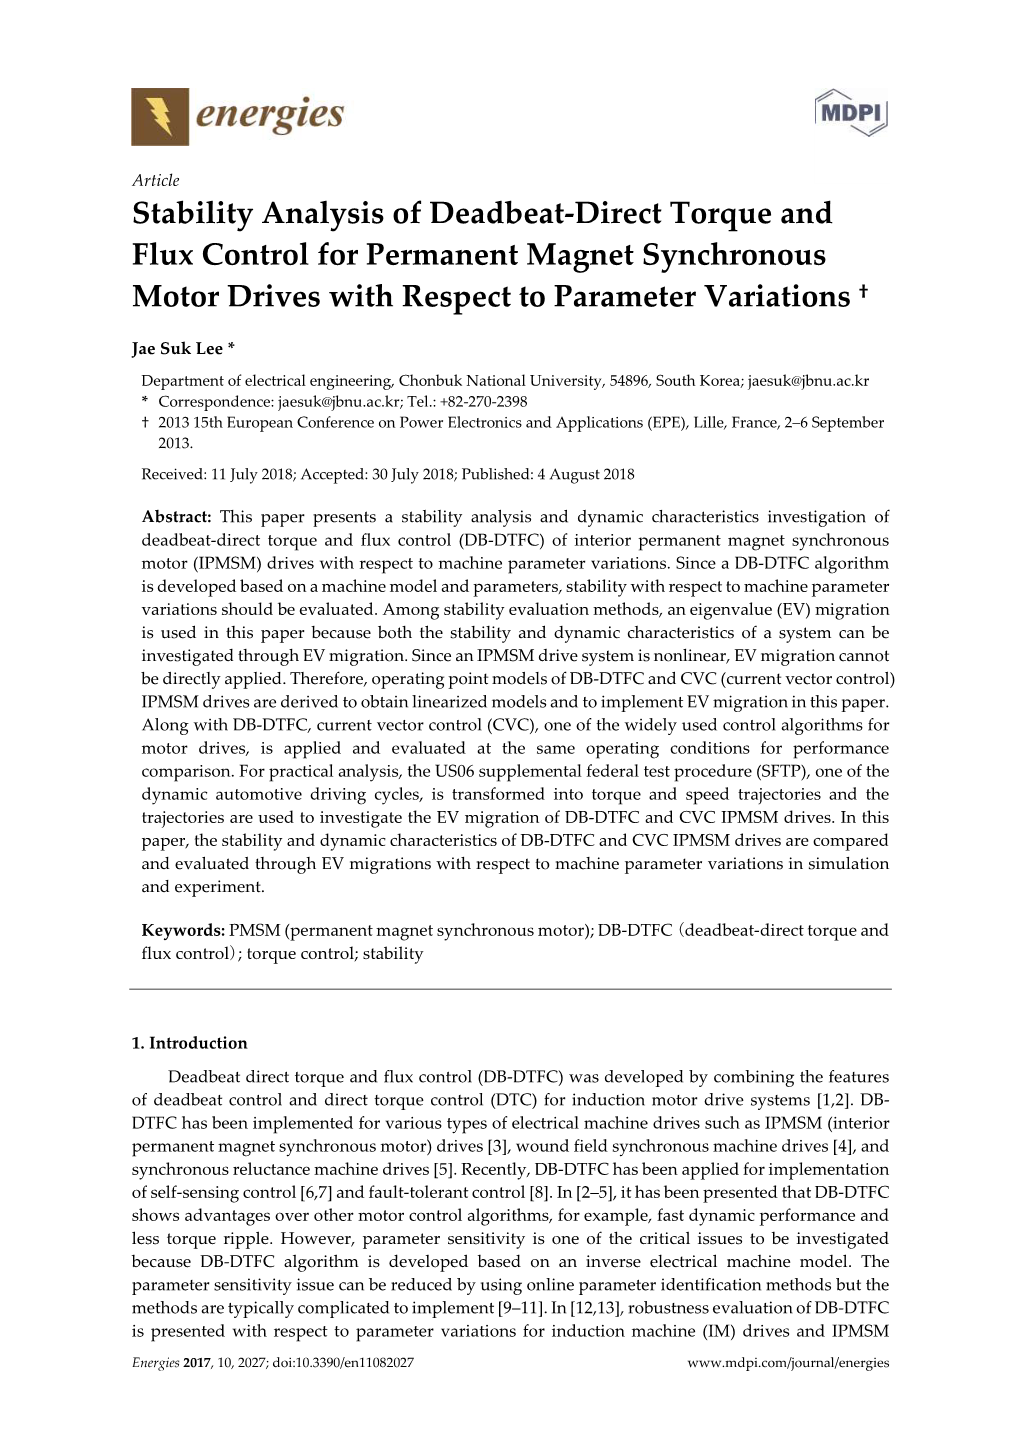 Stability Analysis of Deadbeat-Direct Torque and Flux Control for Permanent Magnet Synchronous Motor Drives with Respect to Parameter Variations †